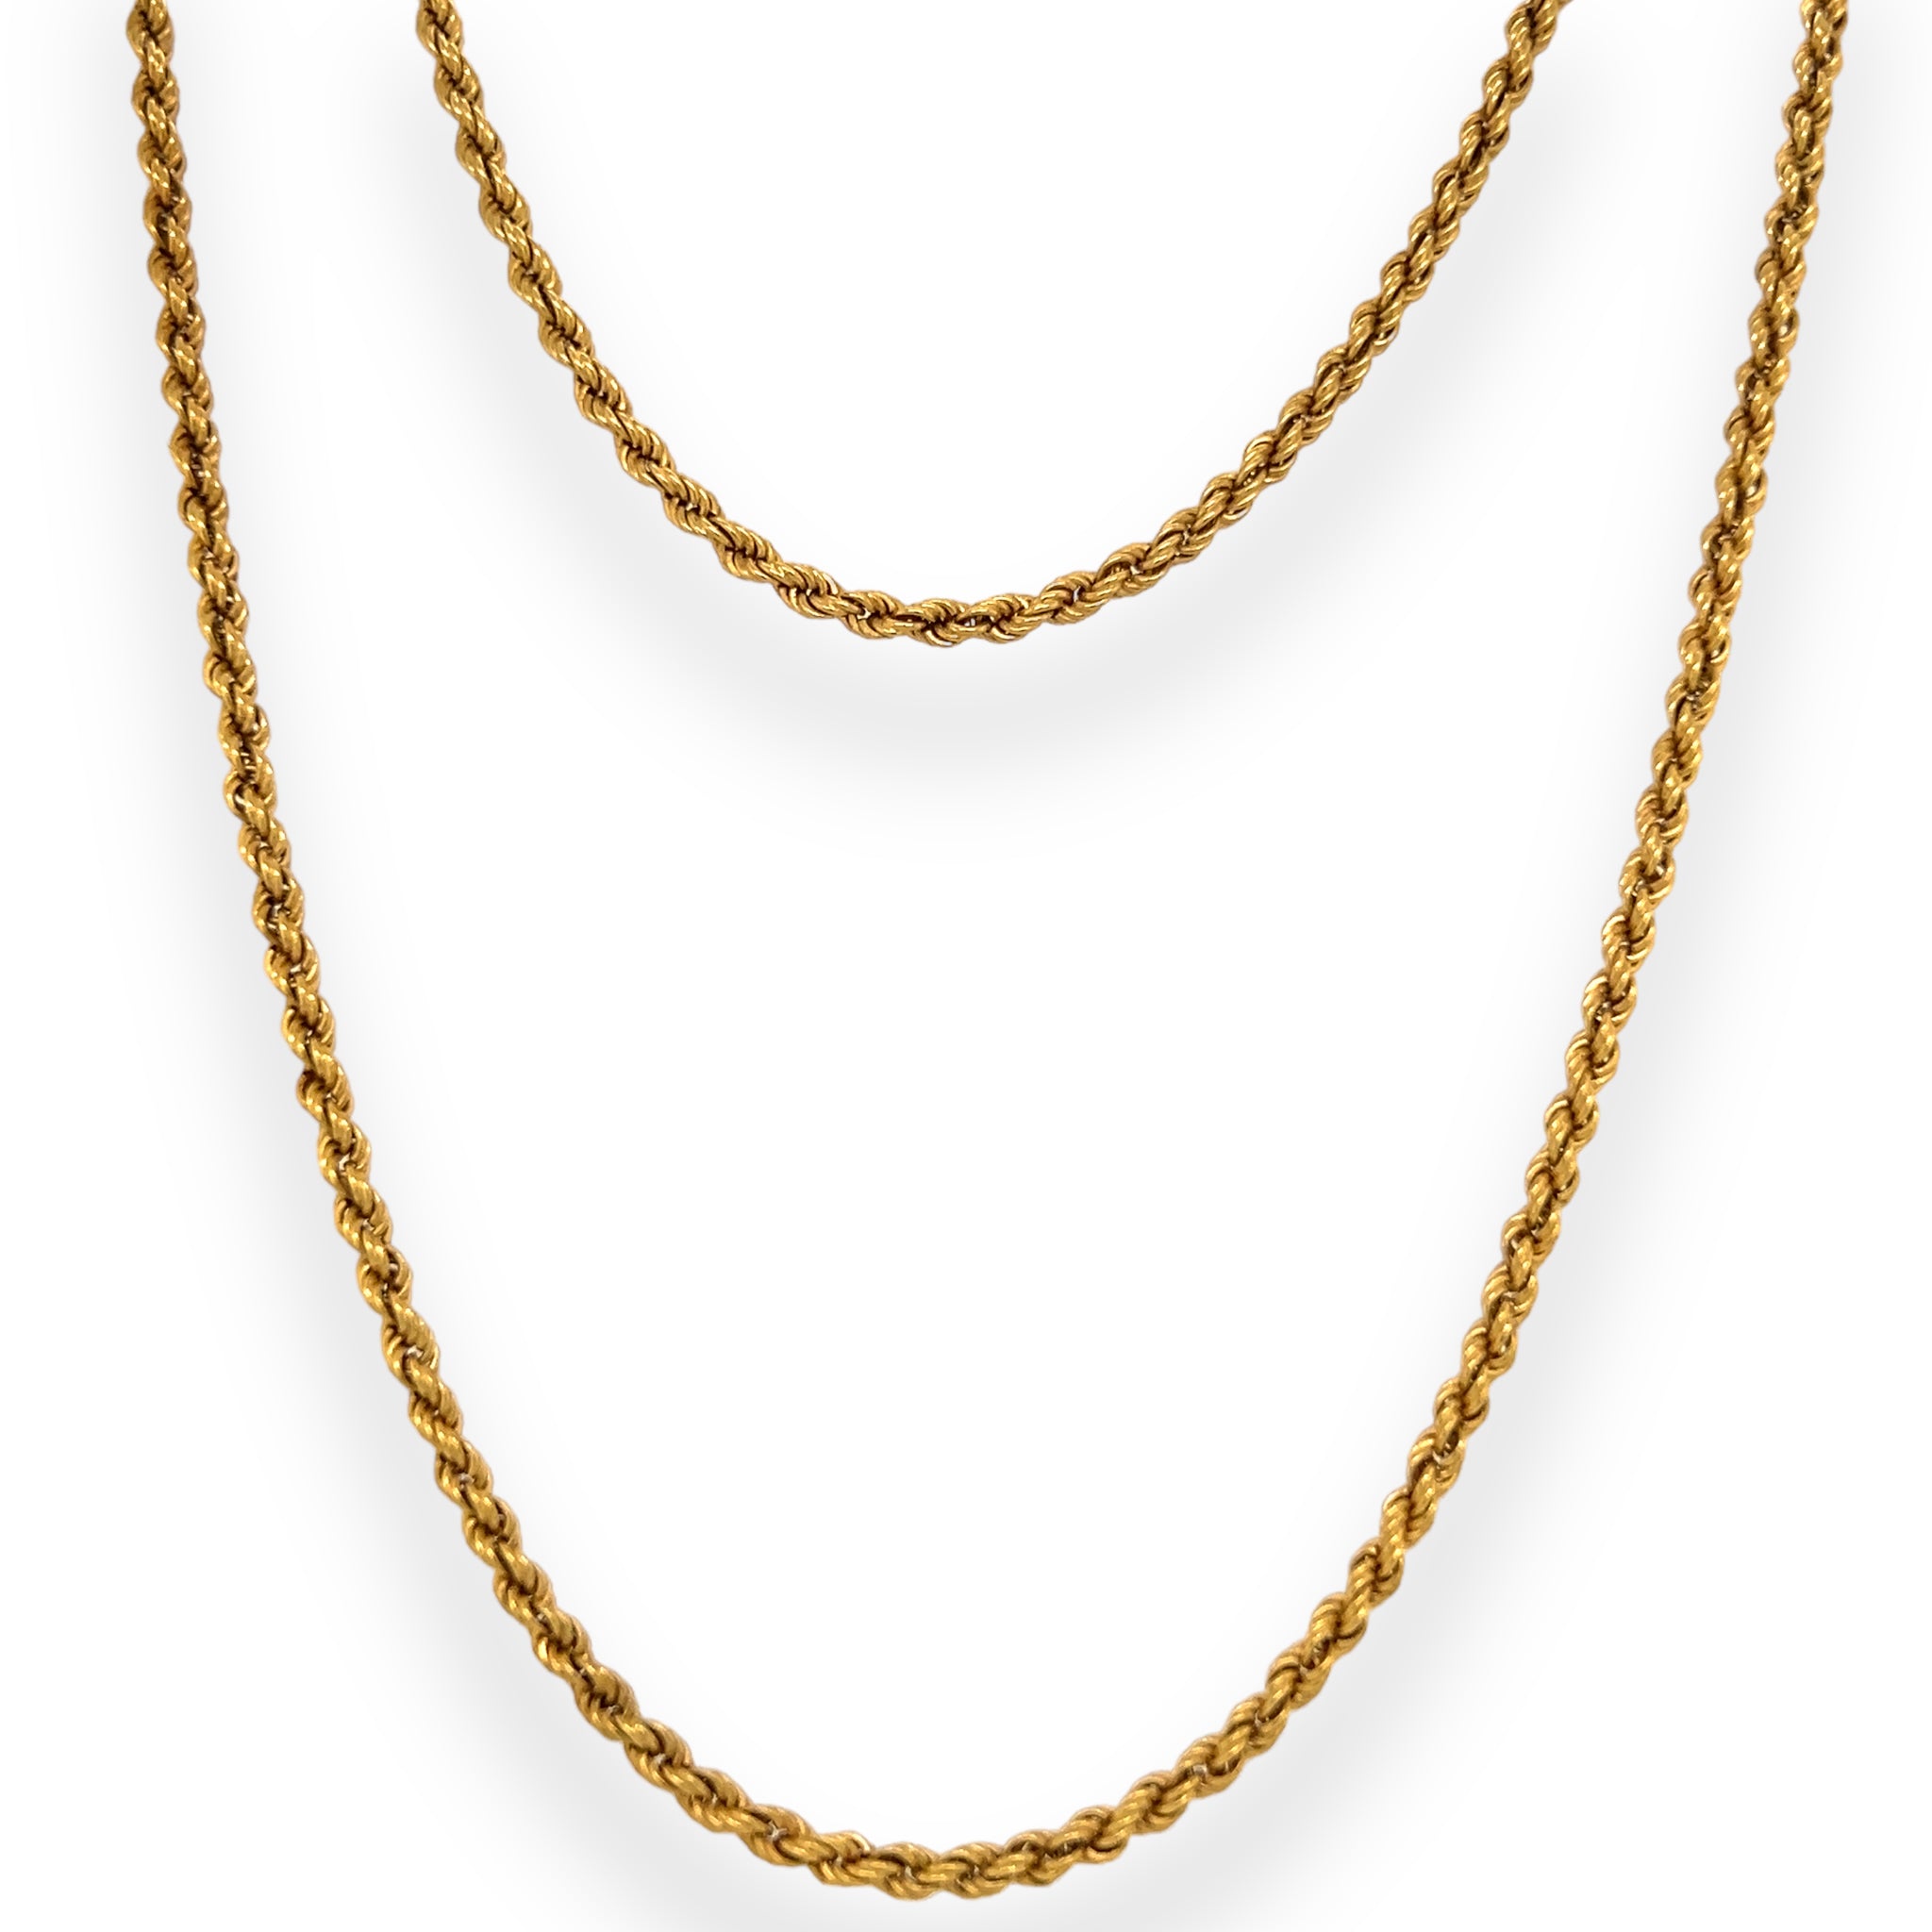 Sold at Auction: Impressive and Heavy Men's 18ct Gold Chain,